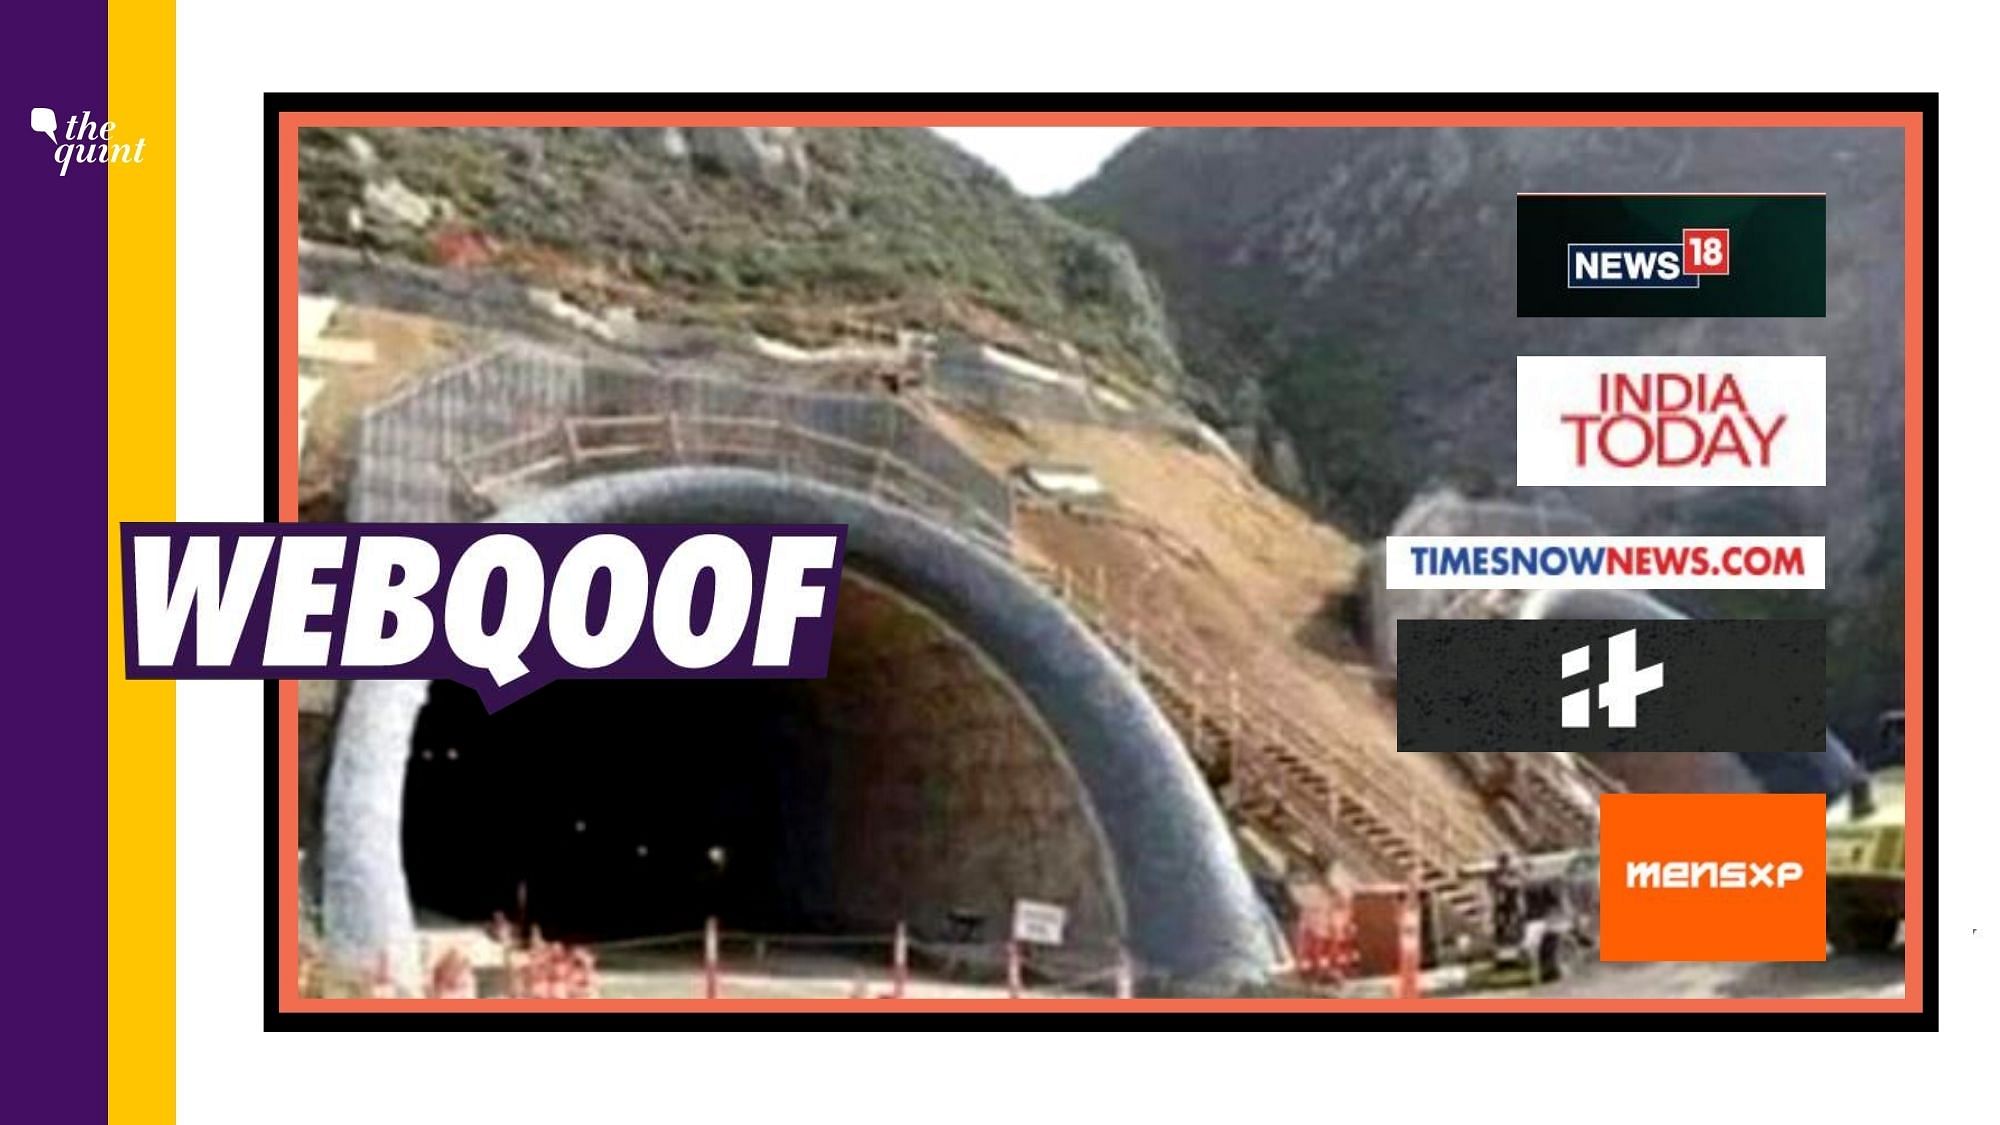 Several media organisations and social media users started sharing an image of the Devils Slide Tunnel in California as that of the Atal Tunnel.